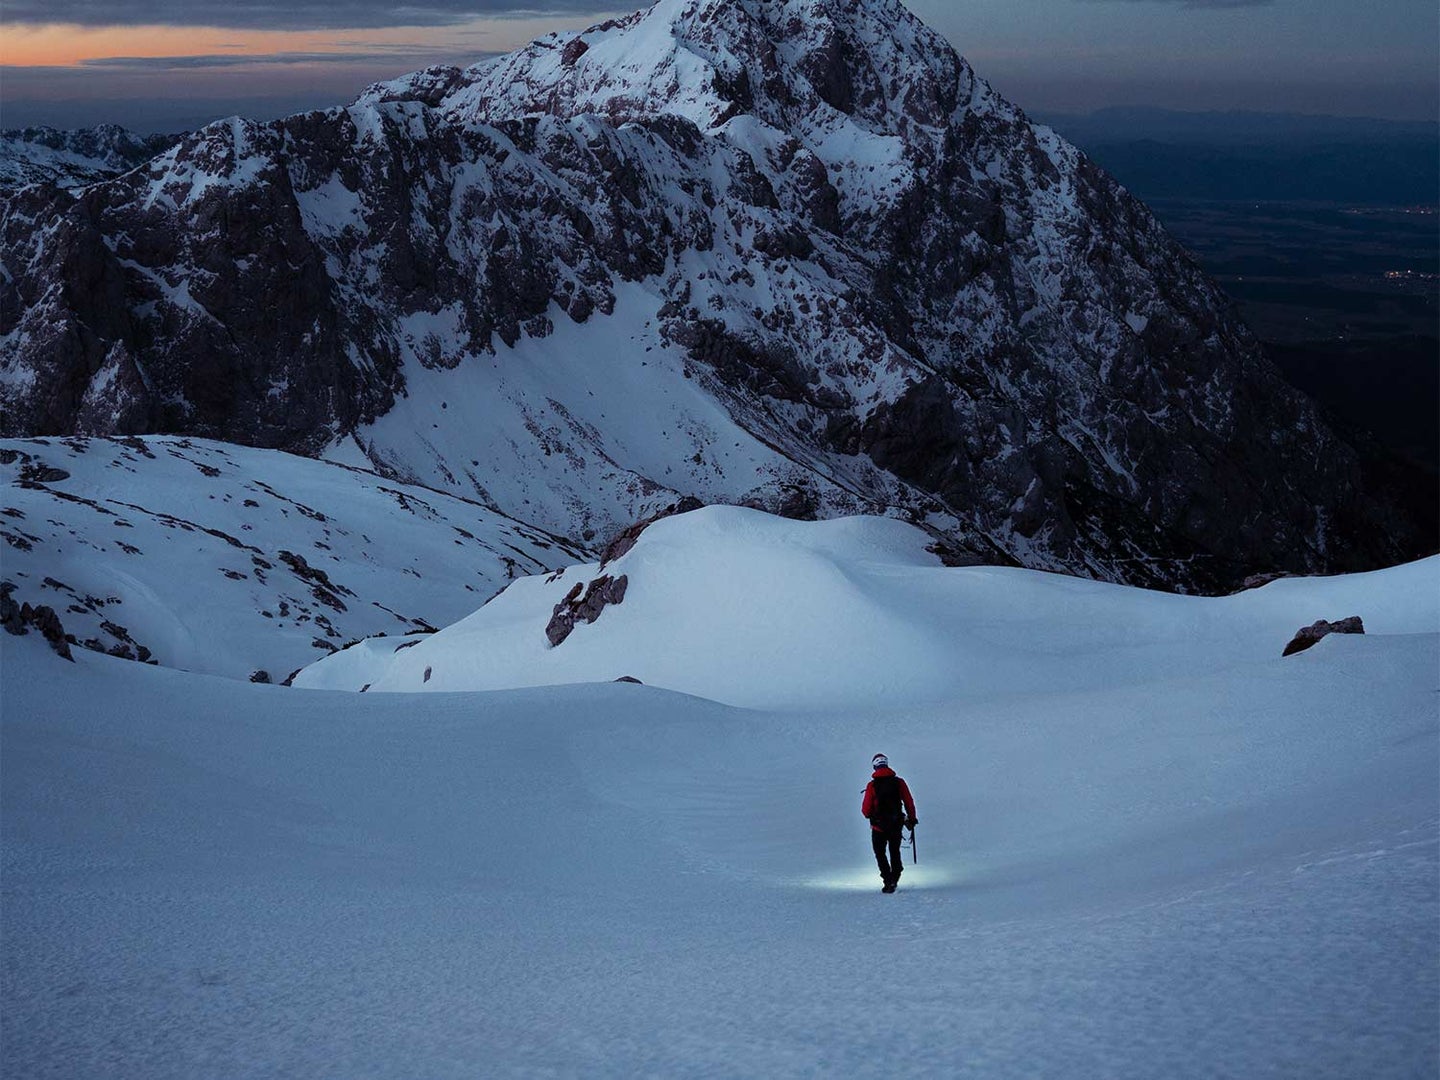 A person walks through the snow on the mountain side.